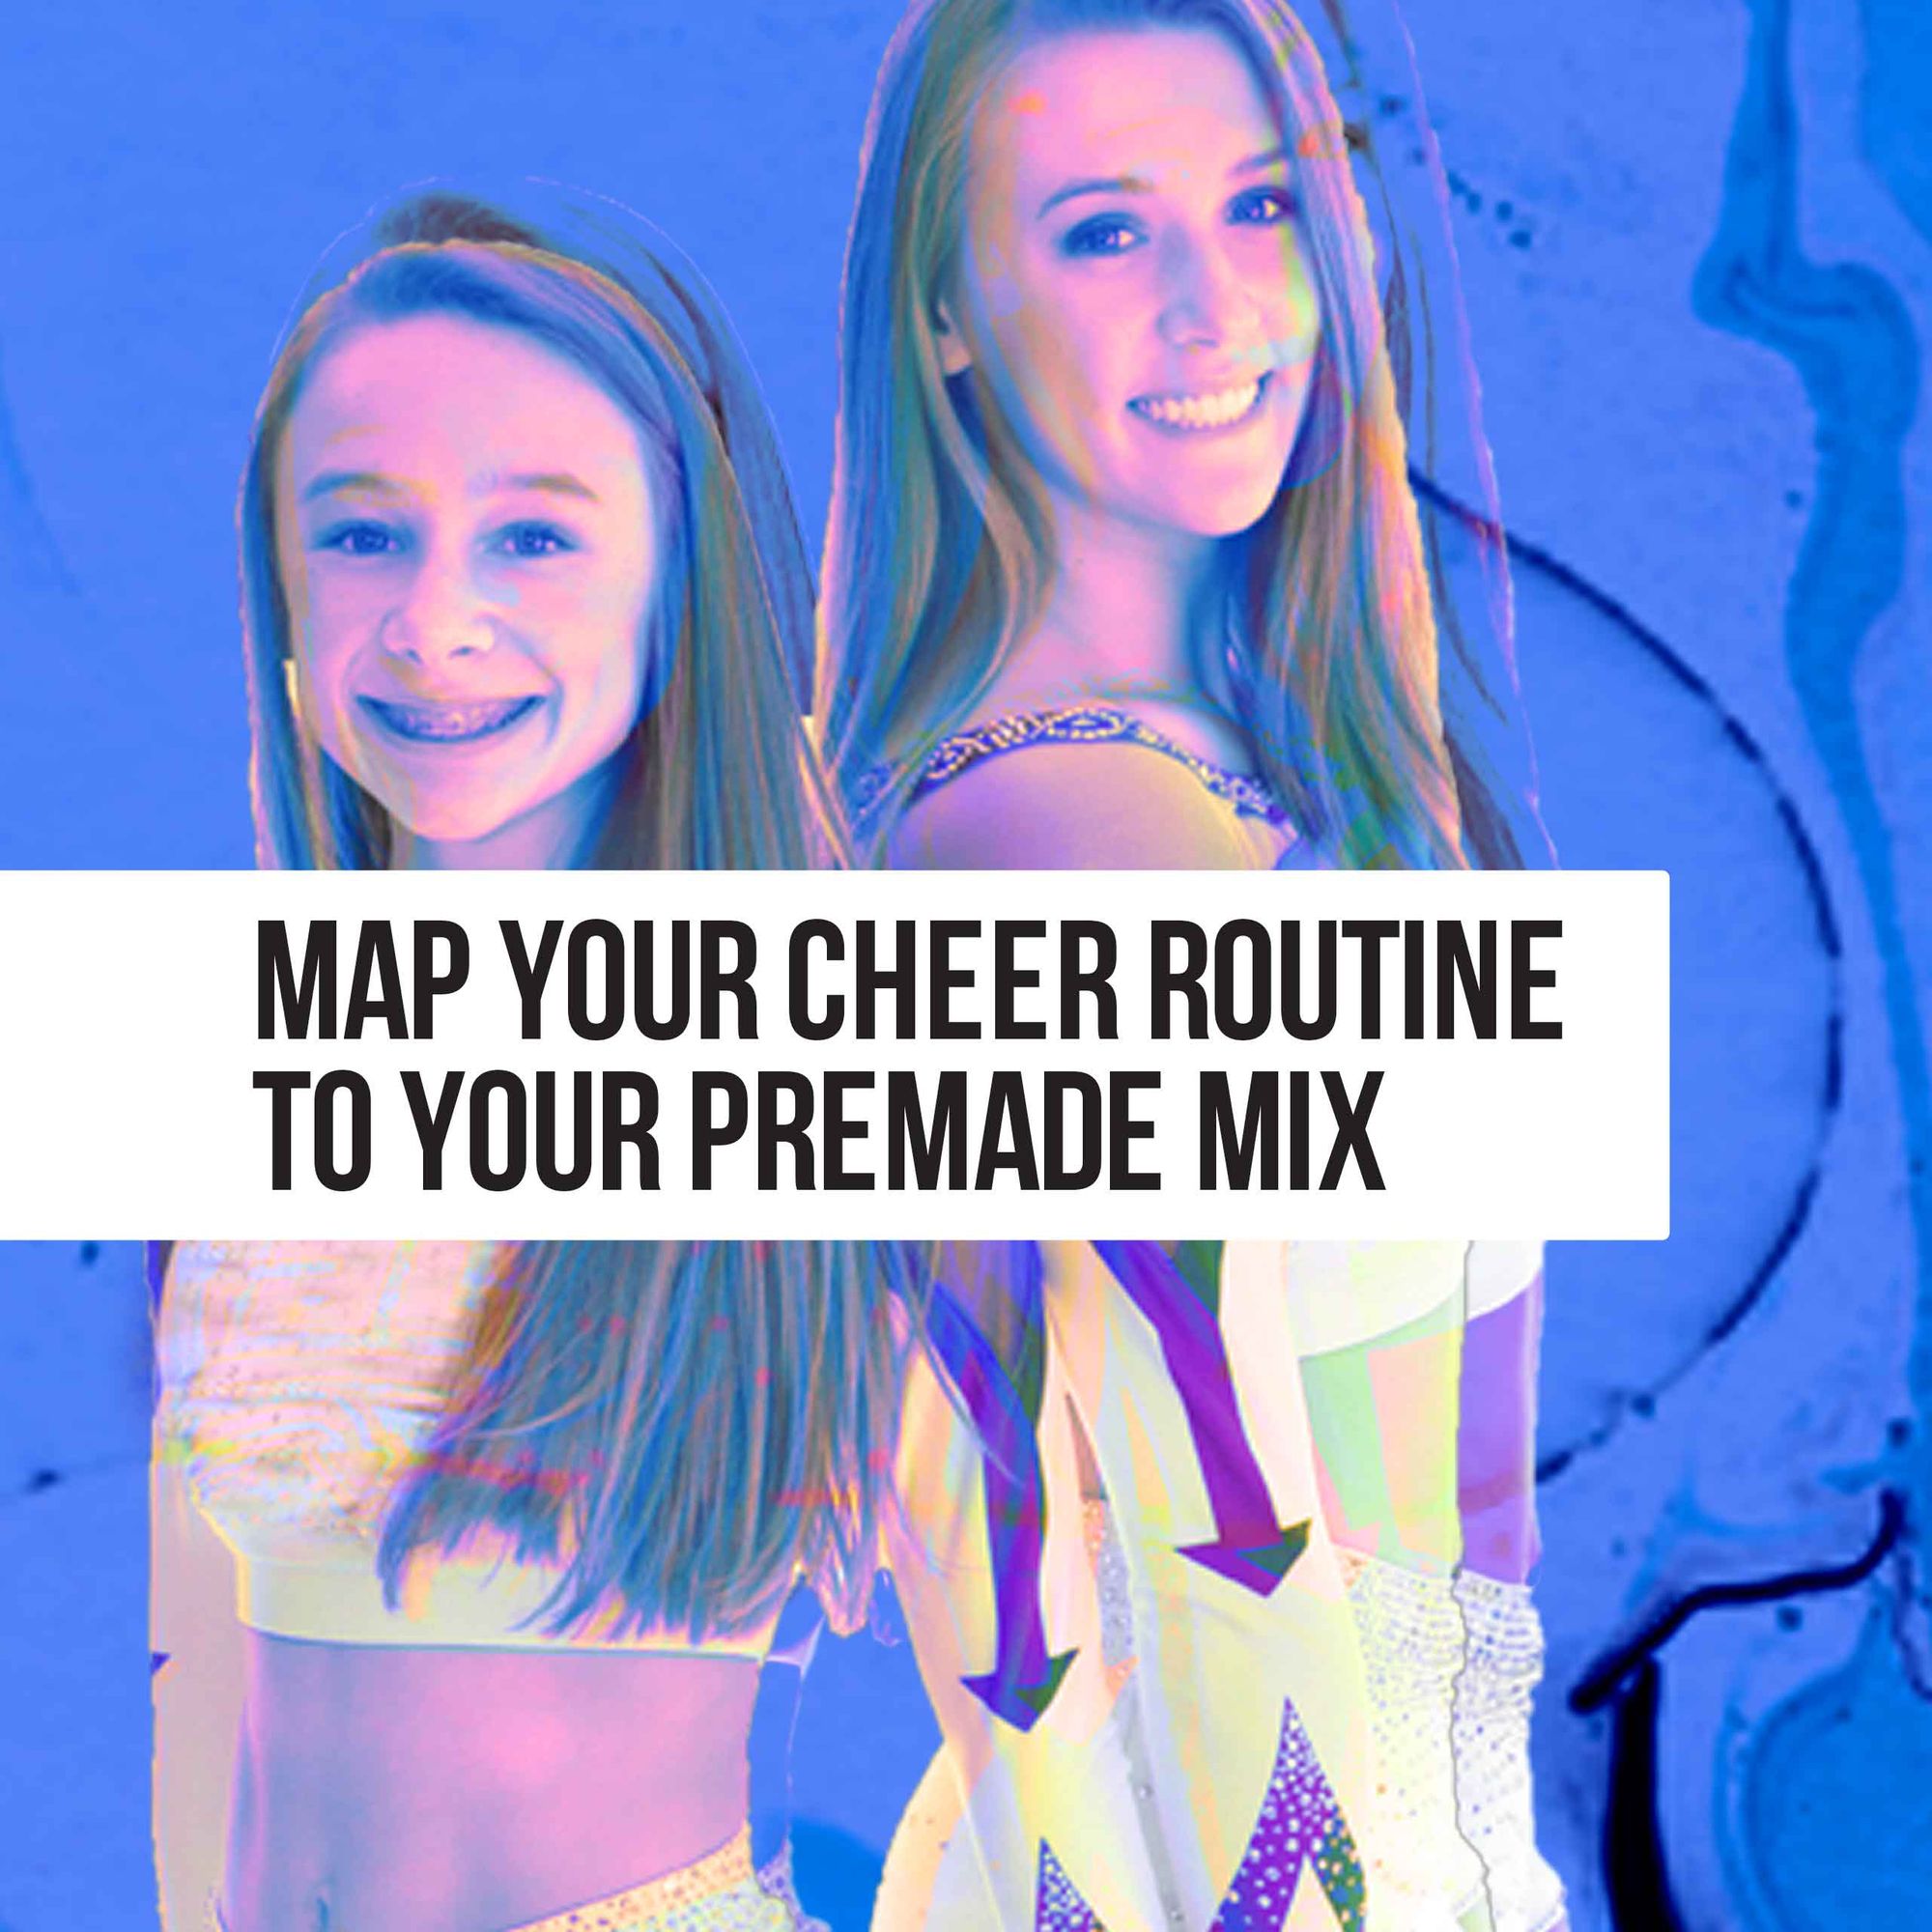 Map your cheer routine to your premade mix